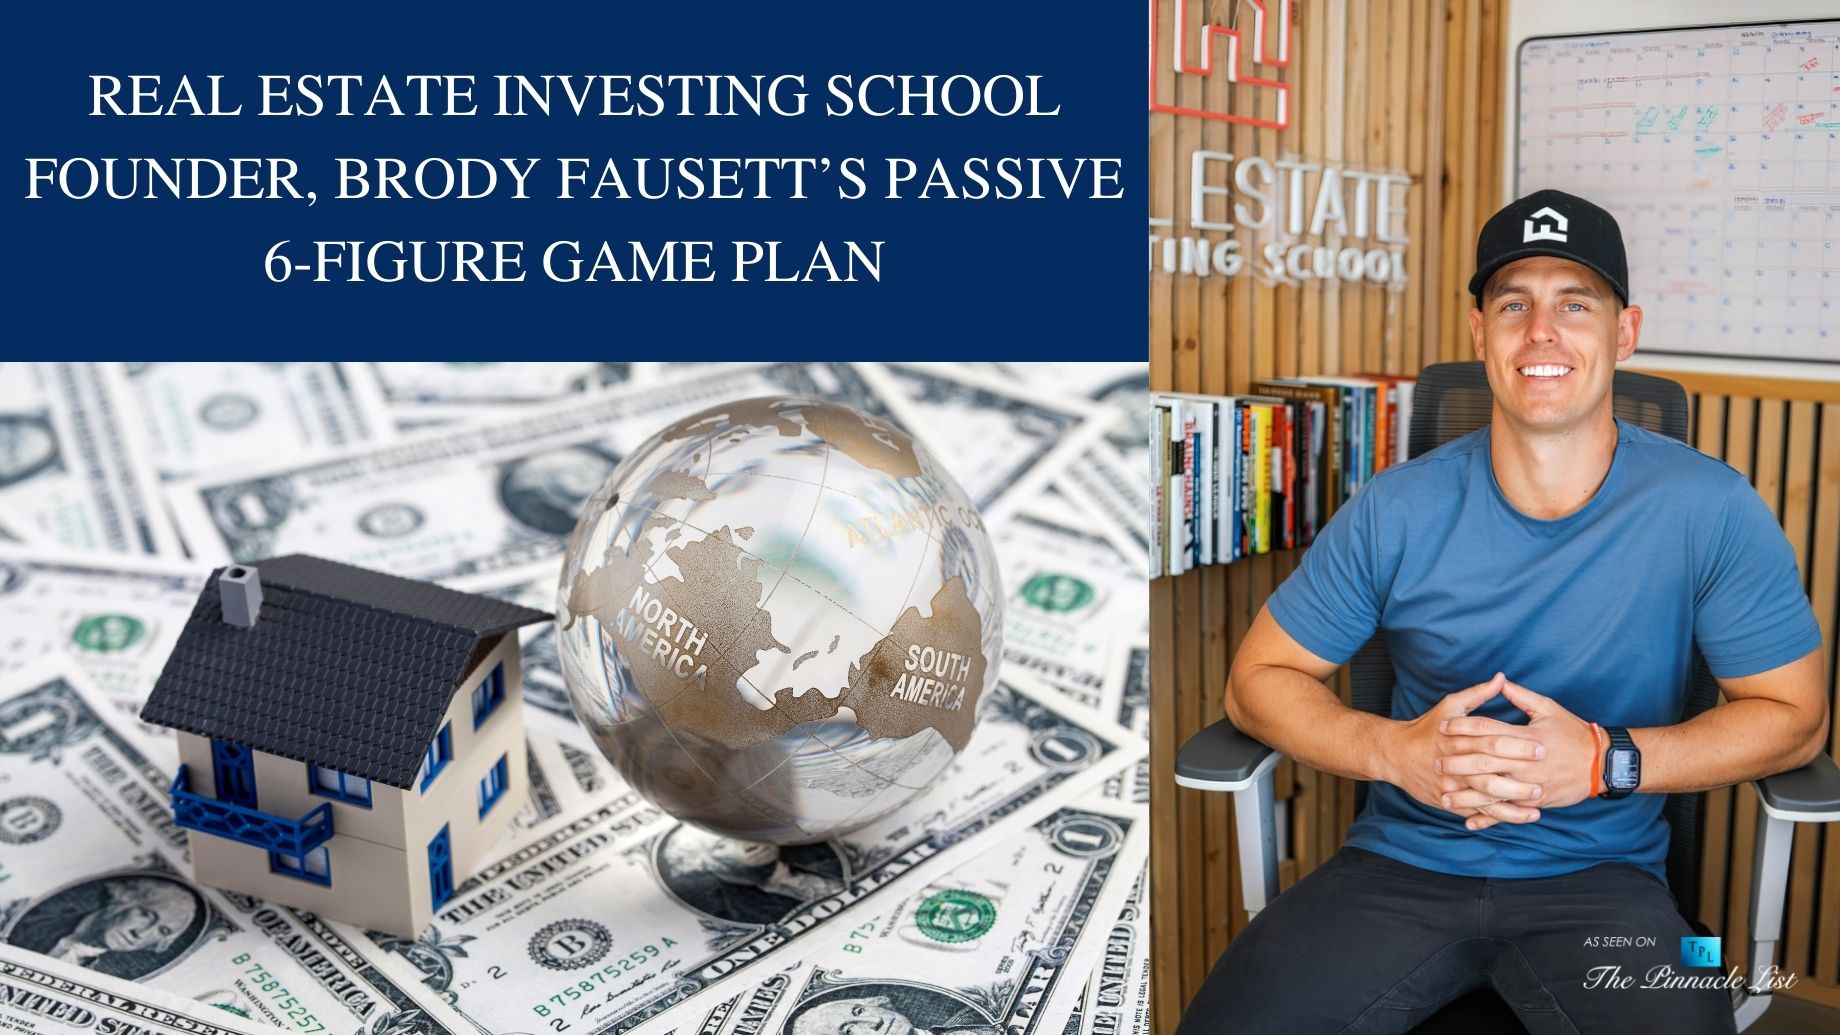 Real Estate Investing School Founder, Brody Fausett’s Passive 6-Figure Game Plan